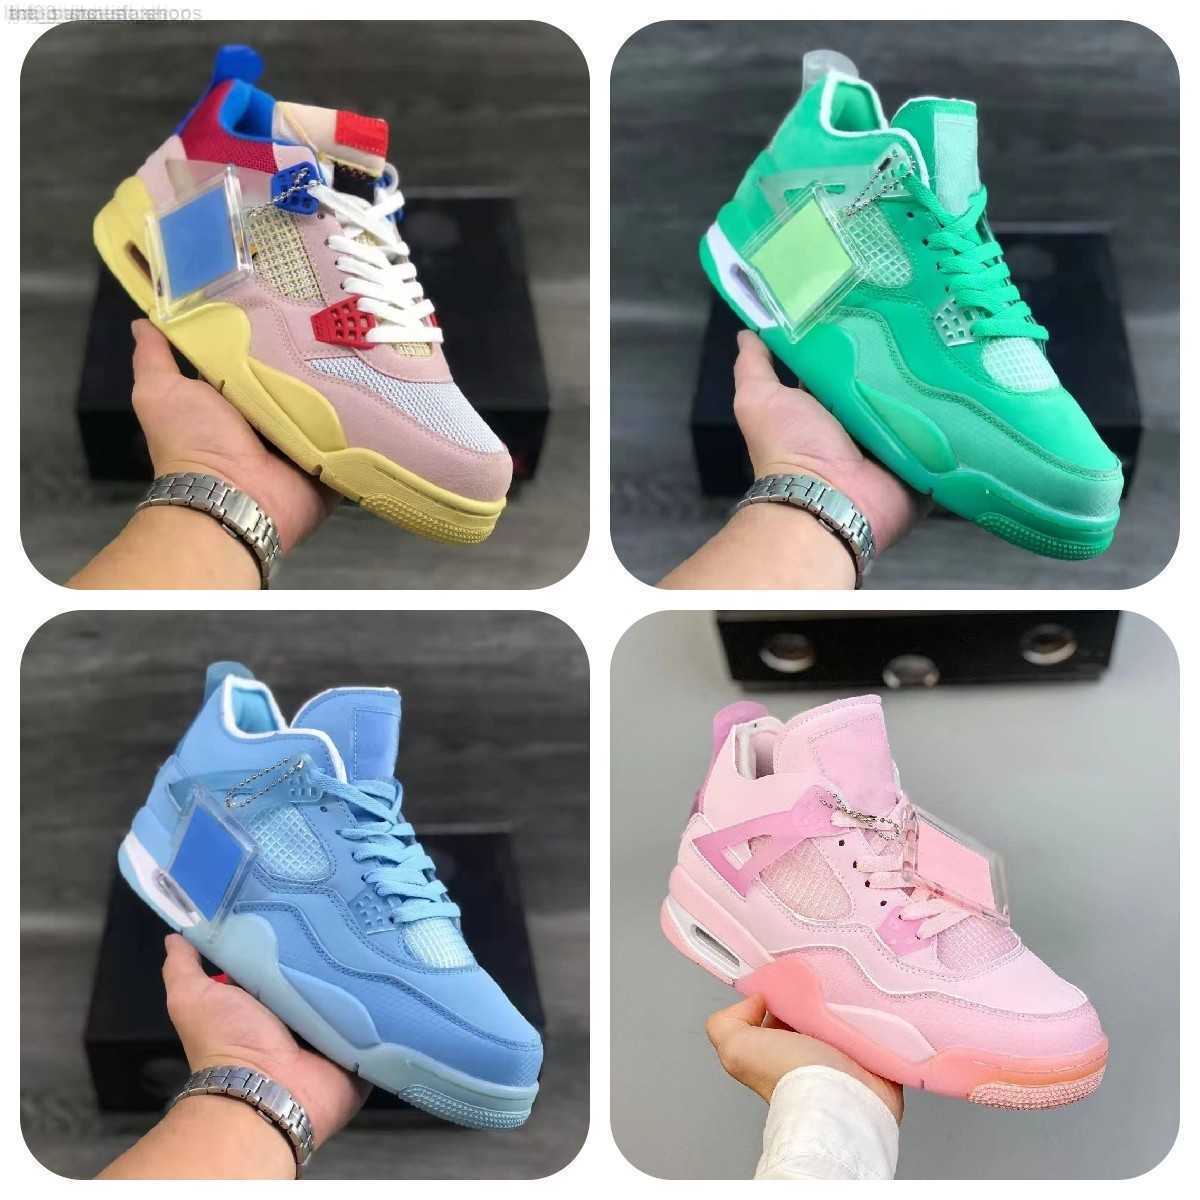 

2022 4s Shimmer Basketball Shoes Men's Women's Pink Blue Fluorescent Blue Fluorescent Green Cherry Blossom Pink 4 Co branded Pe 4s Sneakers